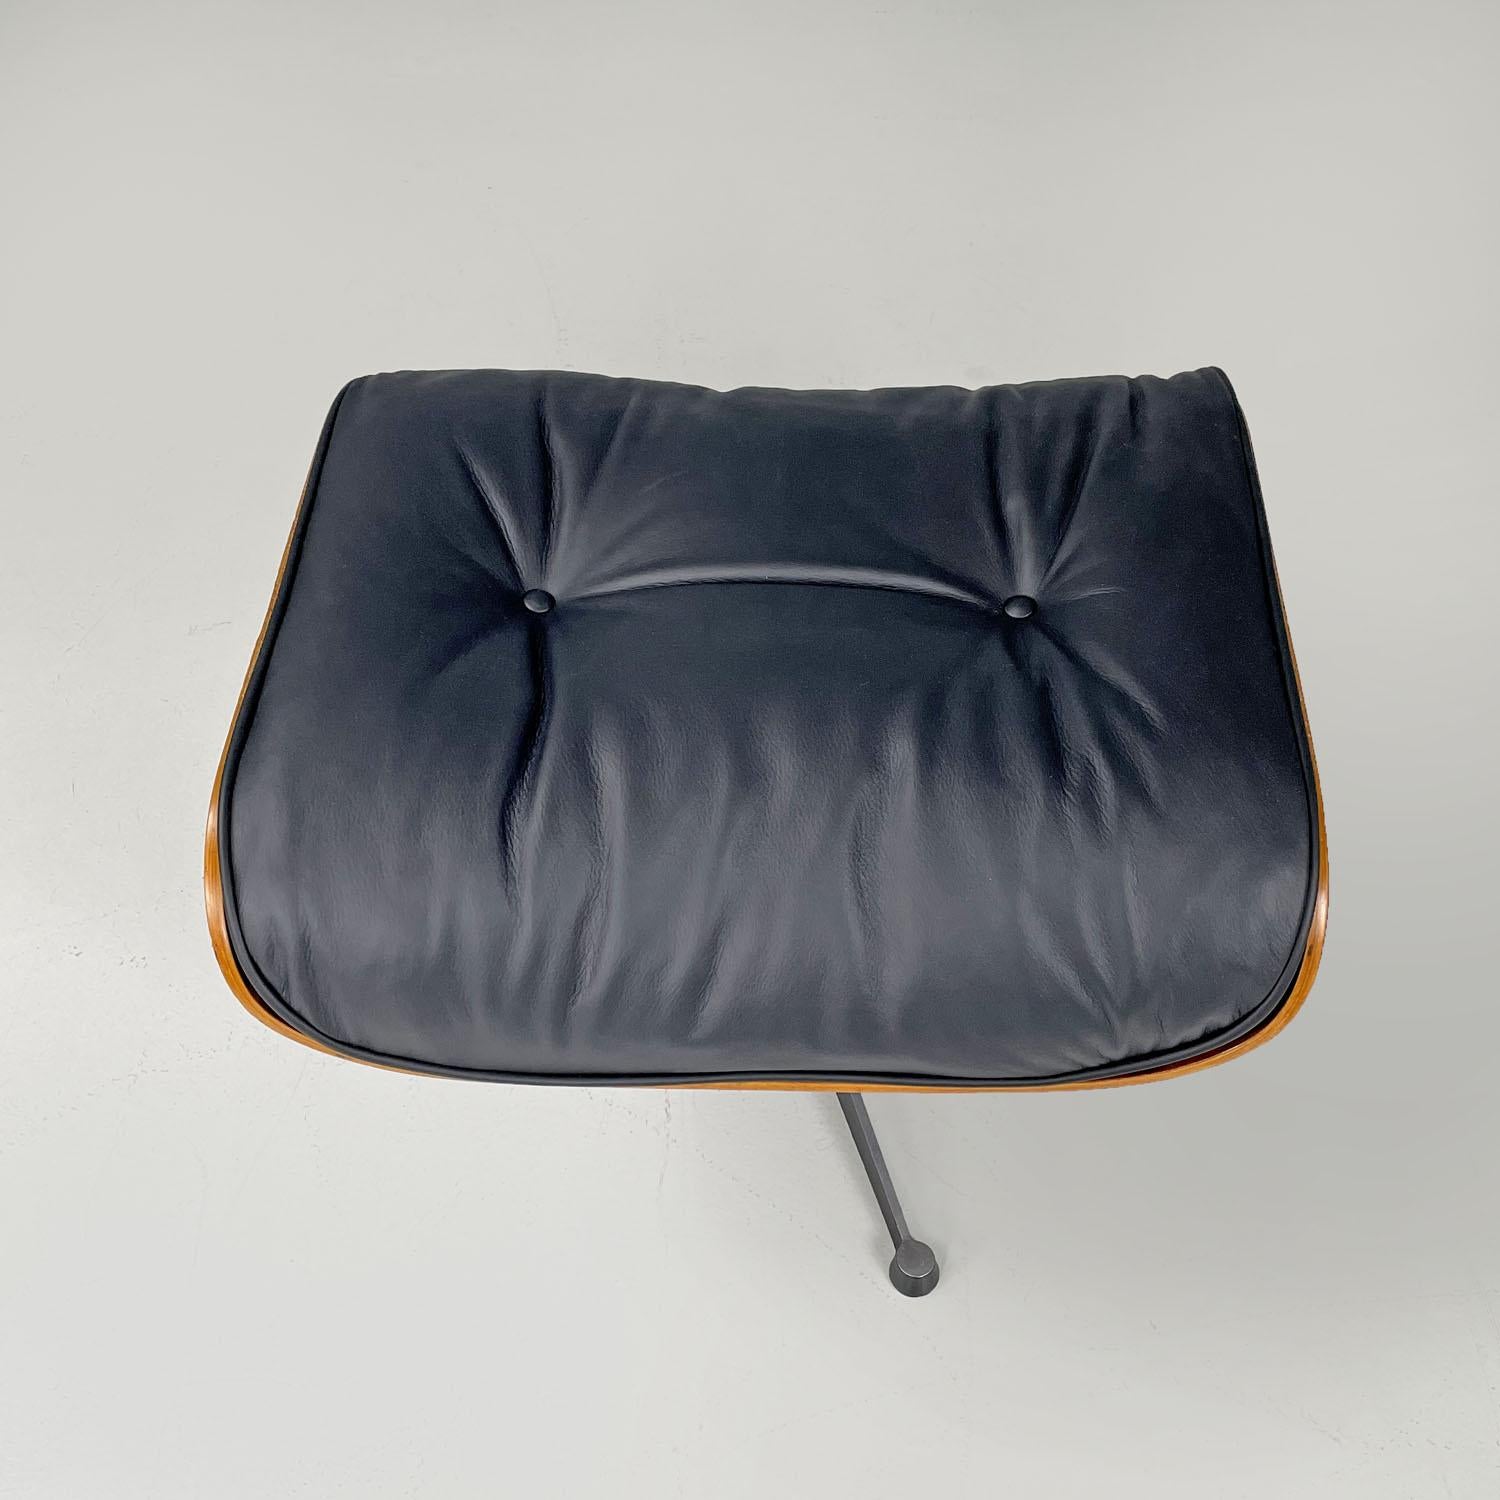 American modern black leather lounge chair 670 671 by Eames for Miller, 1970s For Sale 5